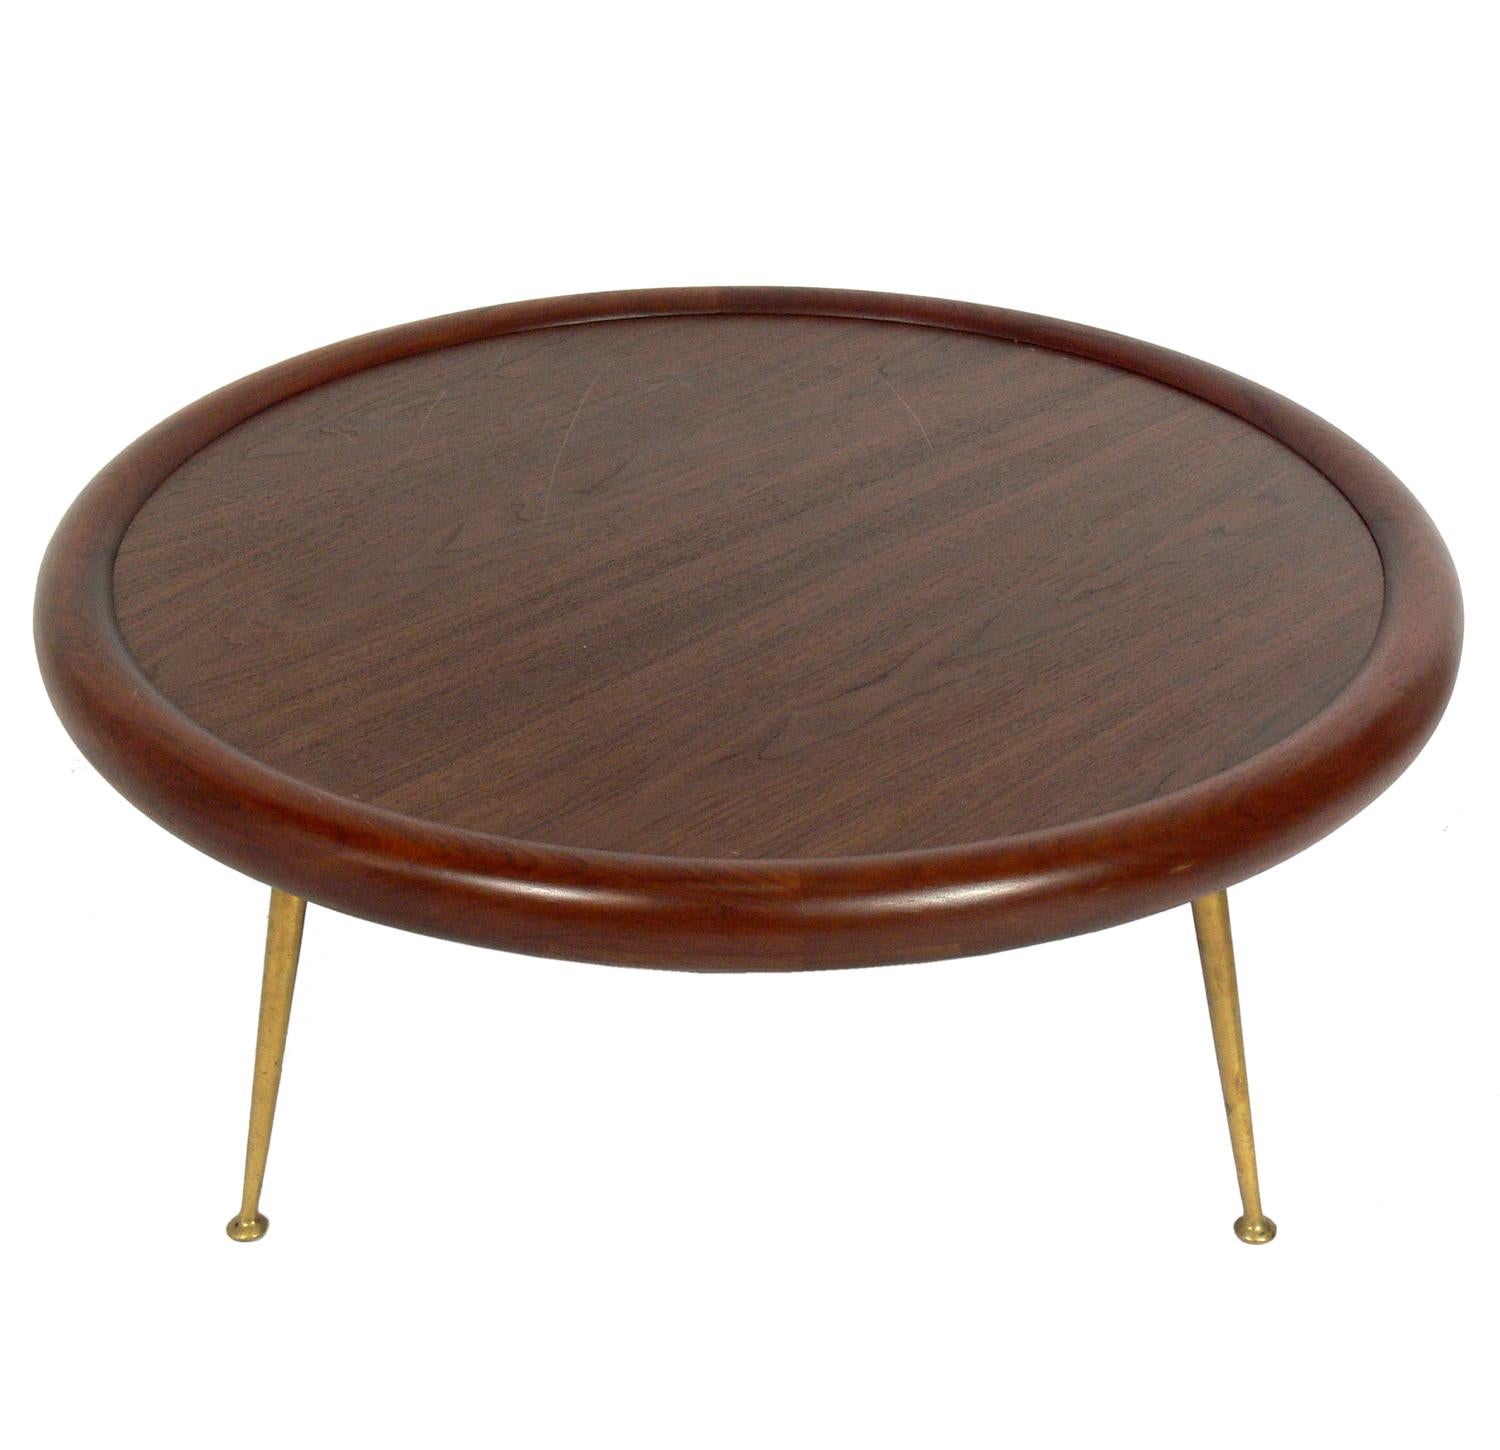 Glamorous Coffee Table or Ottoman, designed by T.H. Robsjohn Gibbings for Widdicomb, American, circa 1950s. The cushion is removable so that it can be used as a coffee table or ottoman or pouf. It has been refinished in a walnut color and